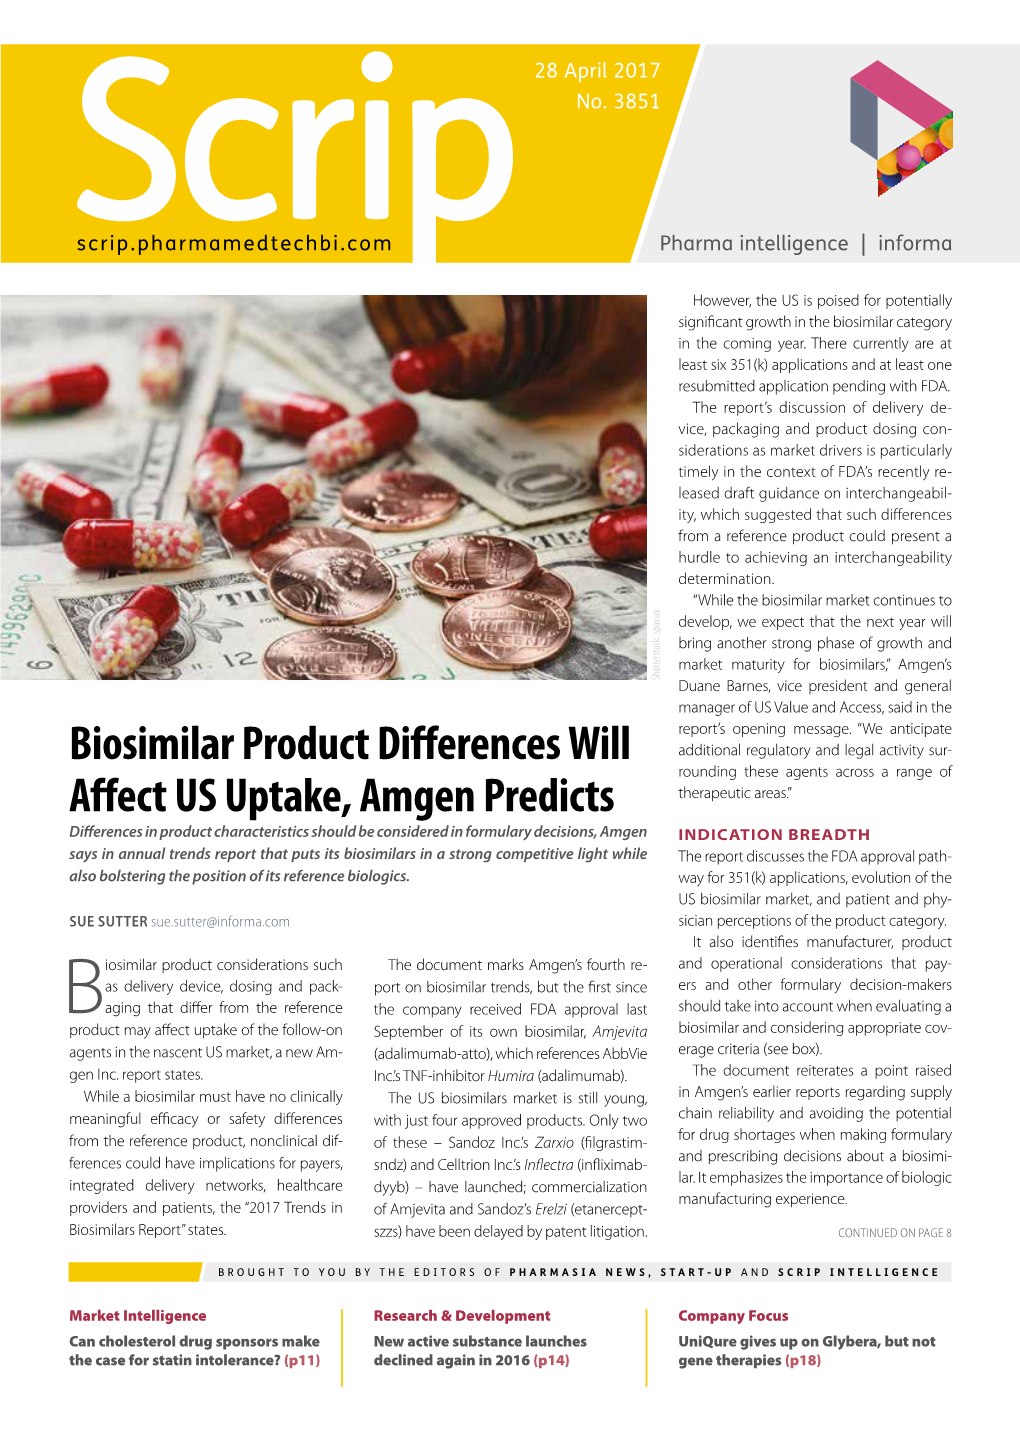 Biosimilar Product Differences Will Affect US Uptake, Amgen Predicts